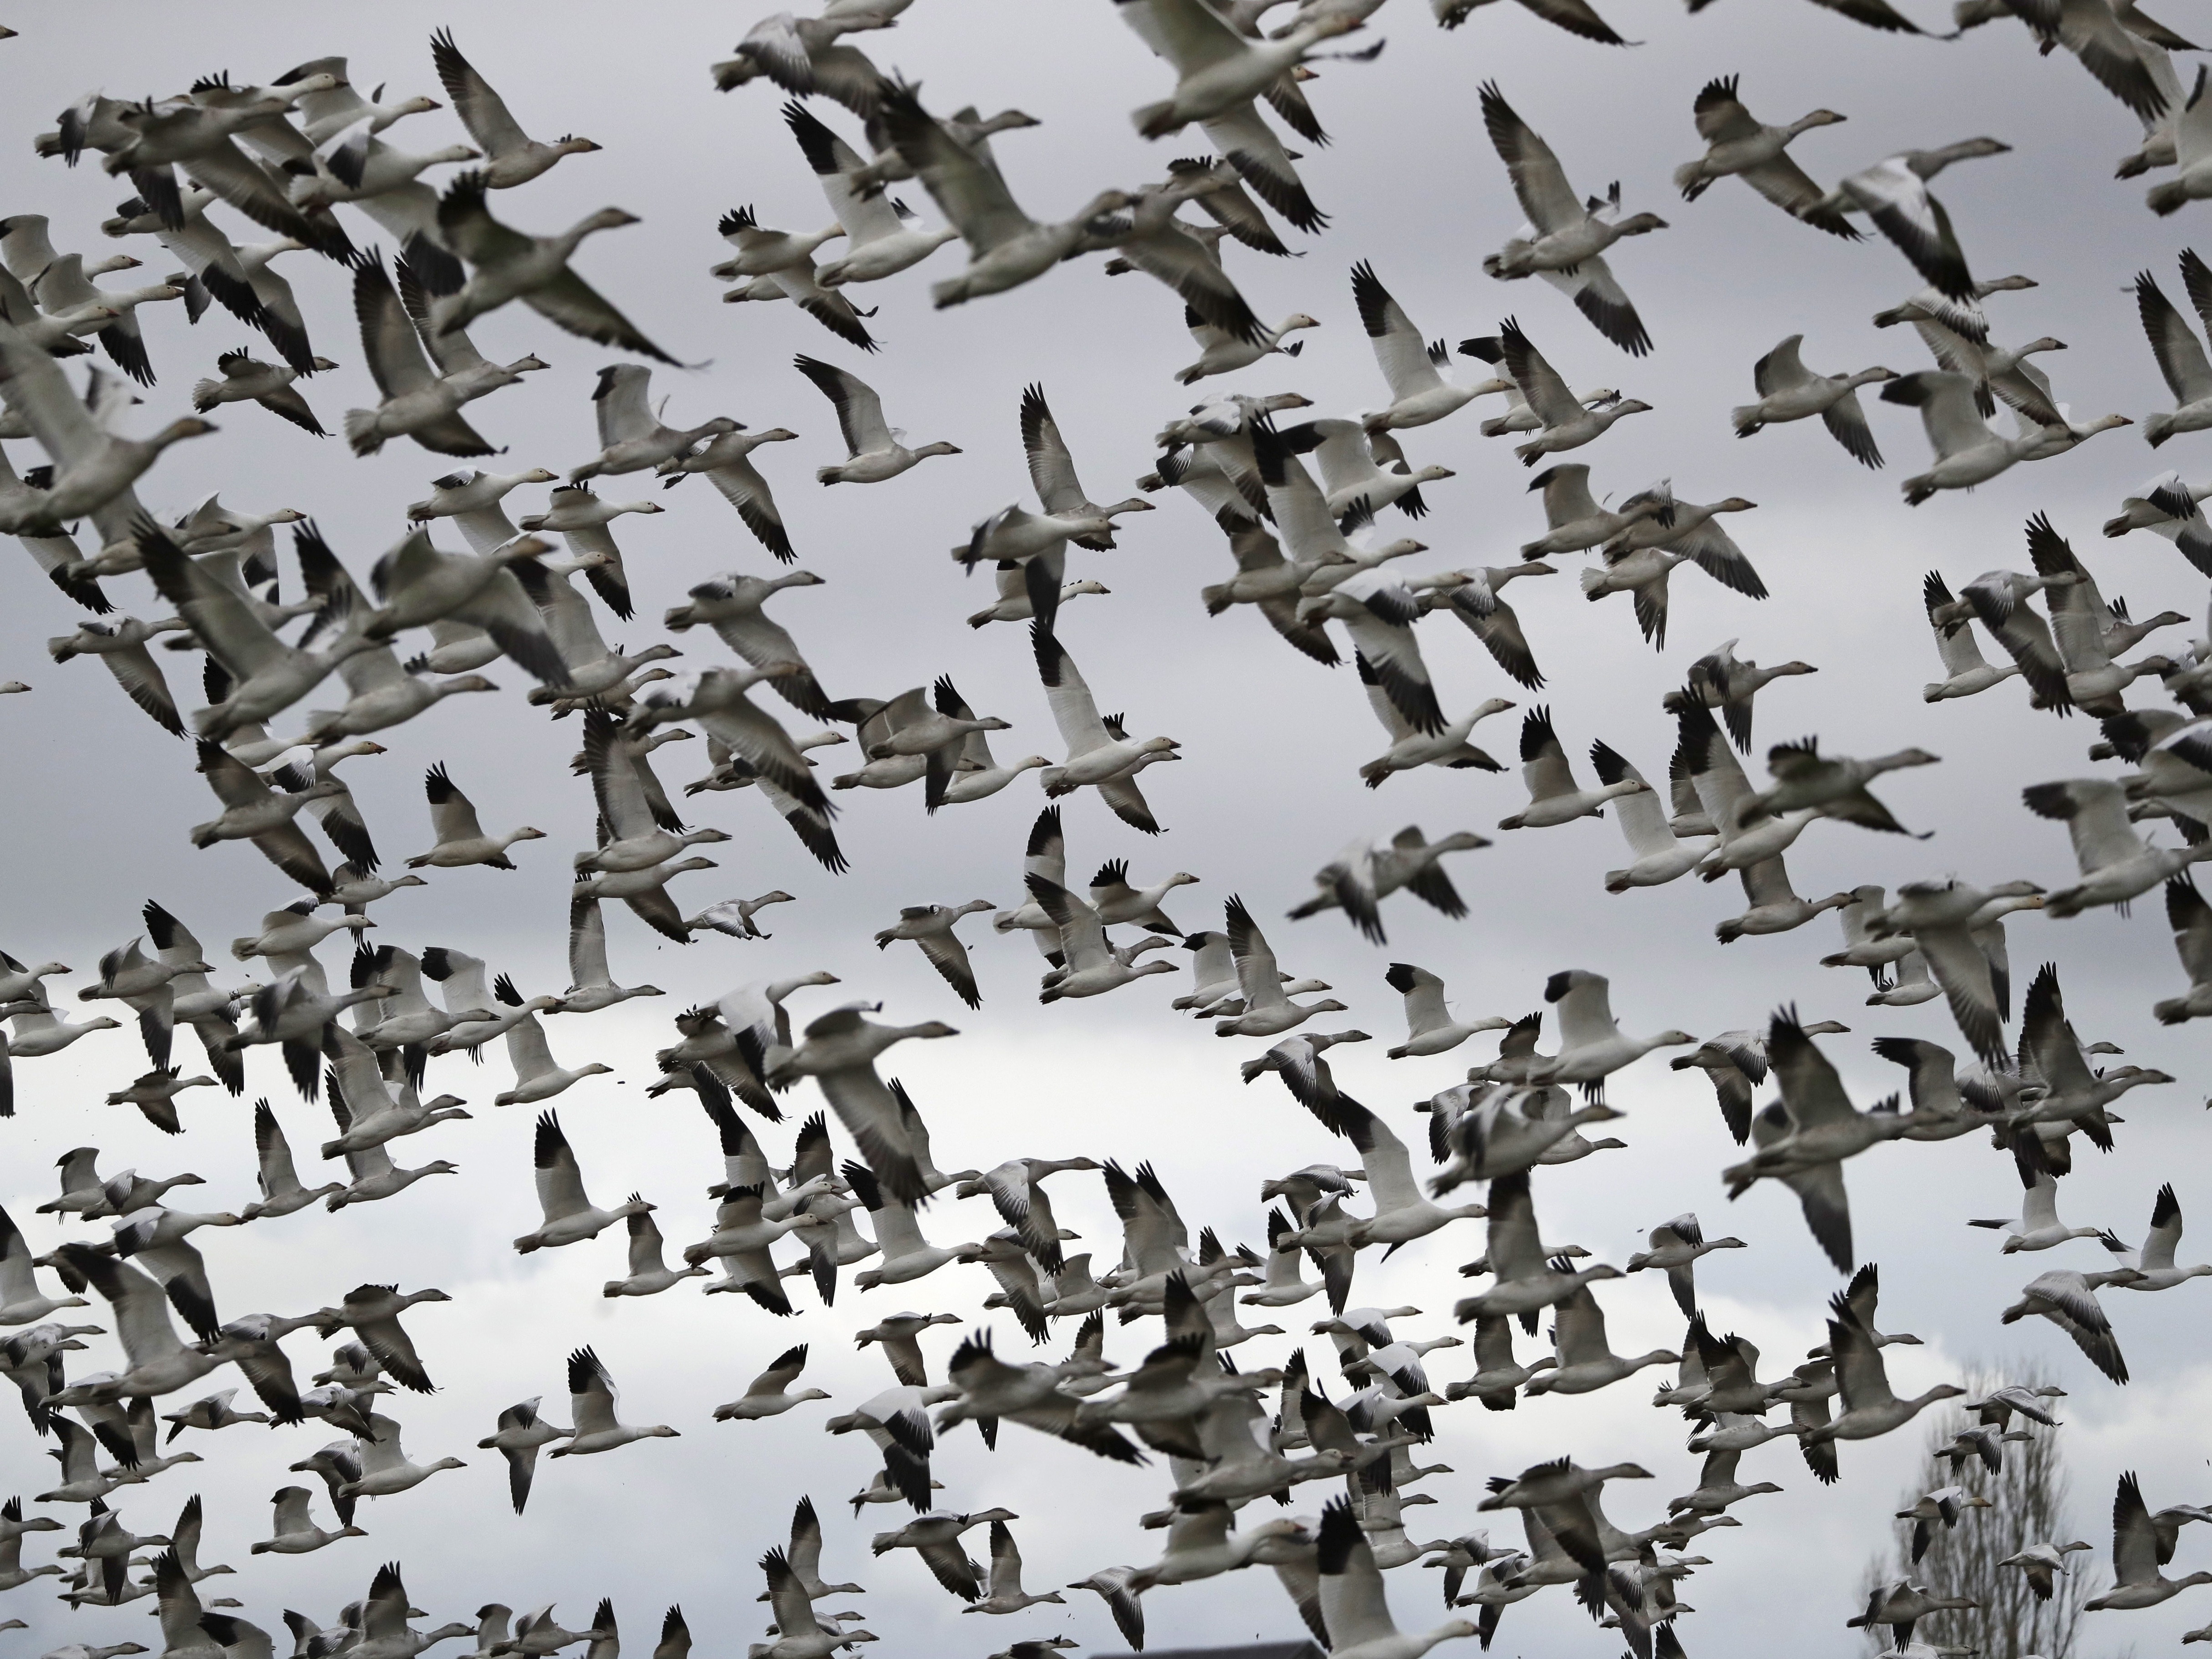 Thousands of snow geese take flight near Conway, Wash. in 2019. The Biden administration is reversing a policy under President Trump that drastically weakened protections for most U.S. bird species. CREDIT: Elaine Thompson/AP